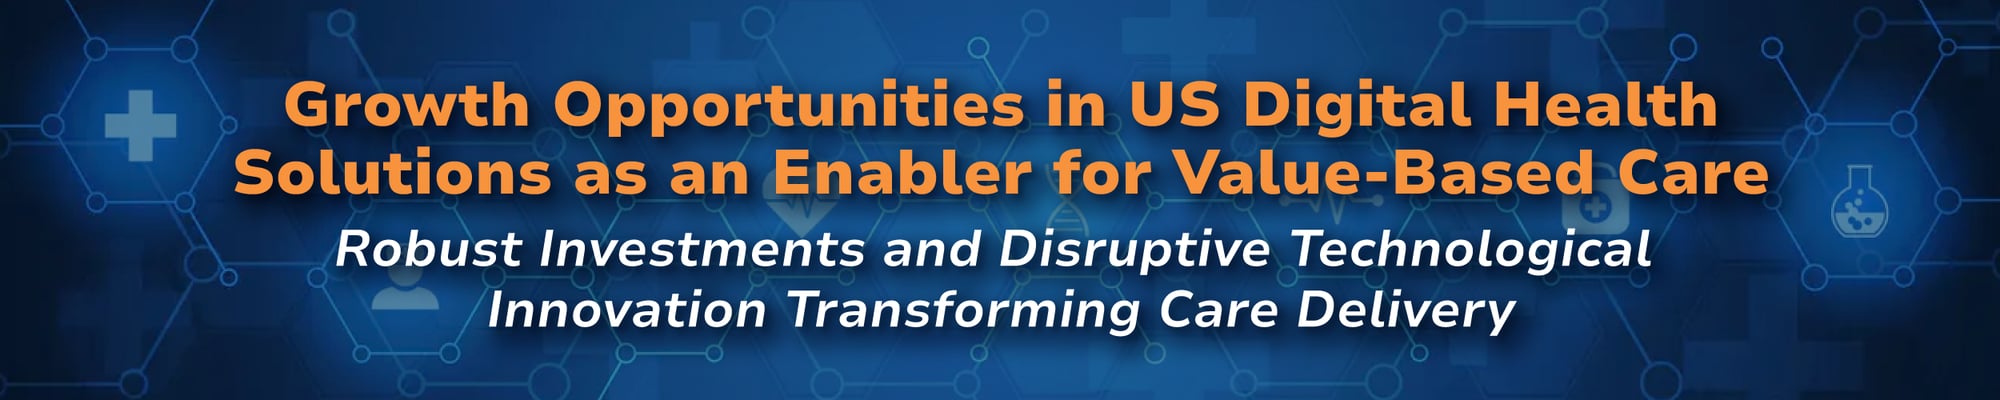 Growth Opportunities in the US Digital Health Solutions as Enablers for Value-Based Care